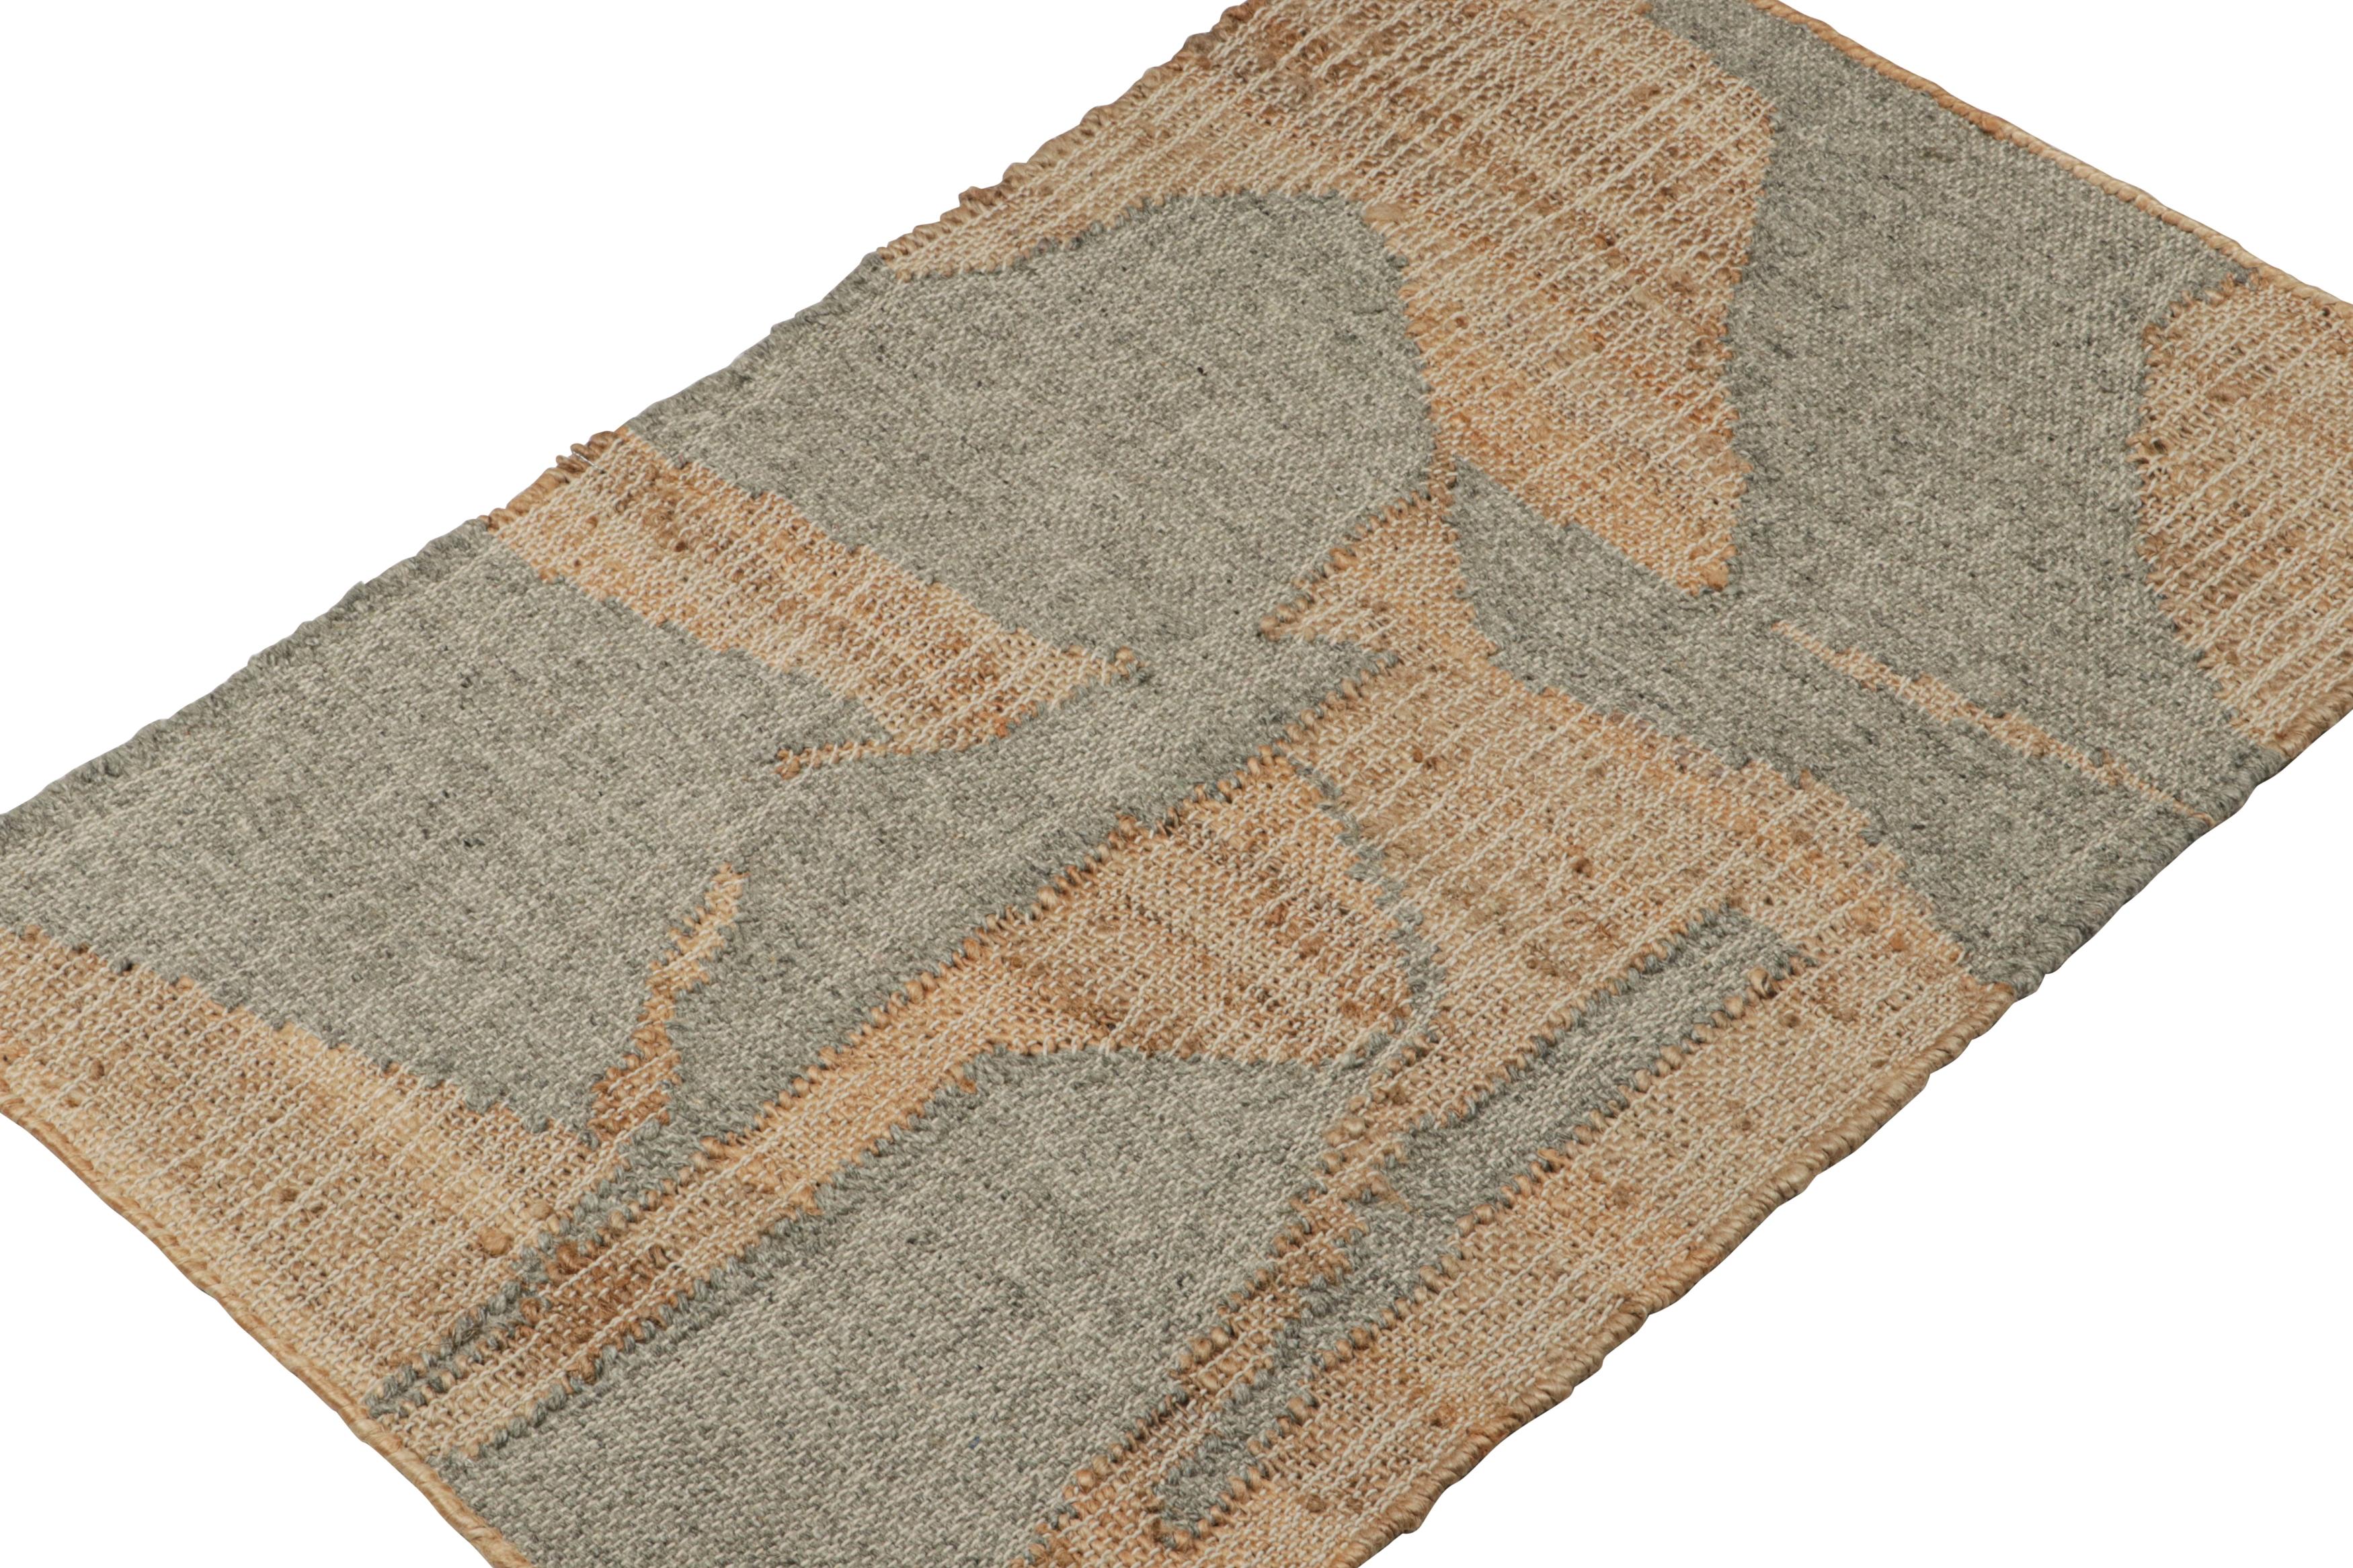 This 2x3 rug is a bold new addition to the flatweave collection by Rug & Kilim.
  
On the Design: 

Handwoven in jute, wool & cotton, this contemporary kilim carries geometric patterns in brown and grey. Further enjoying a durable body, an all